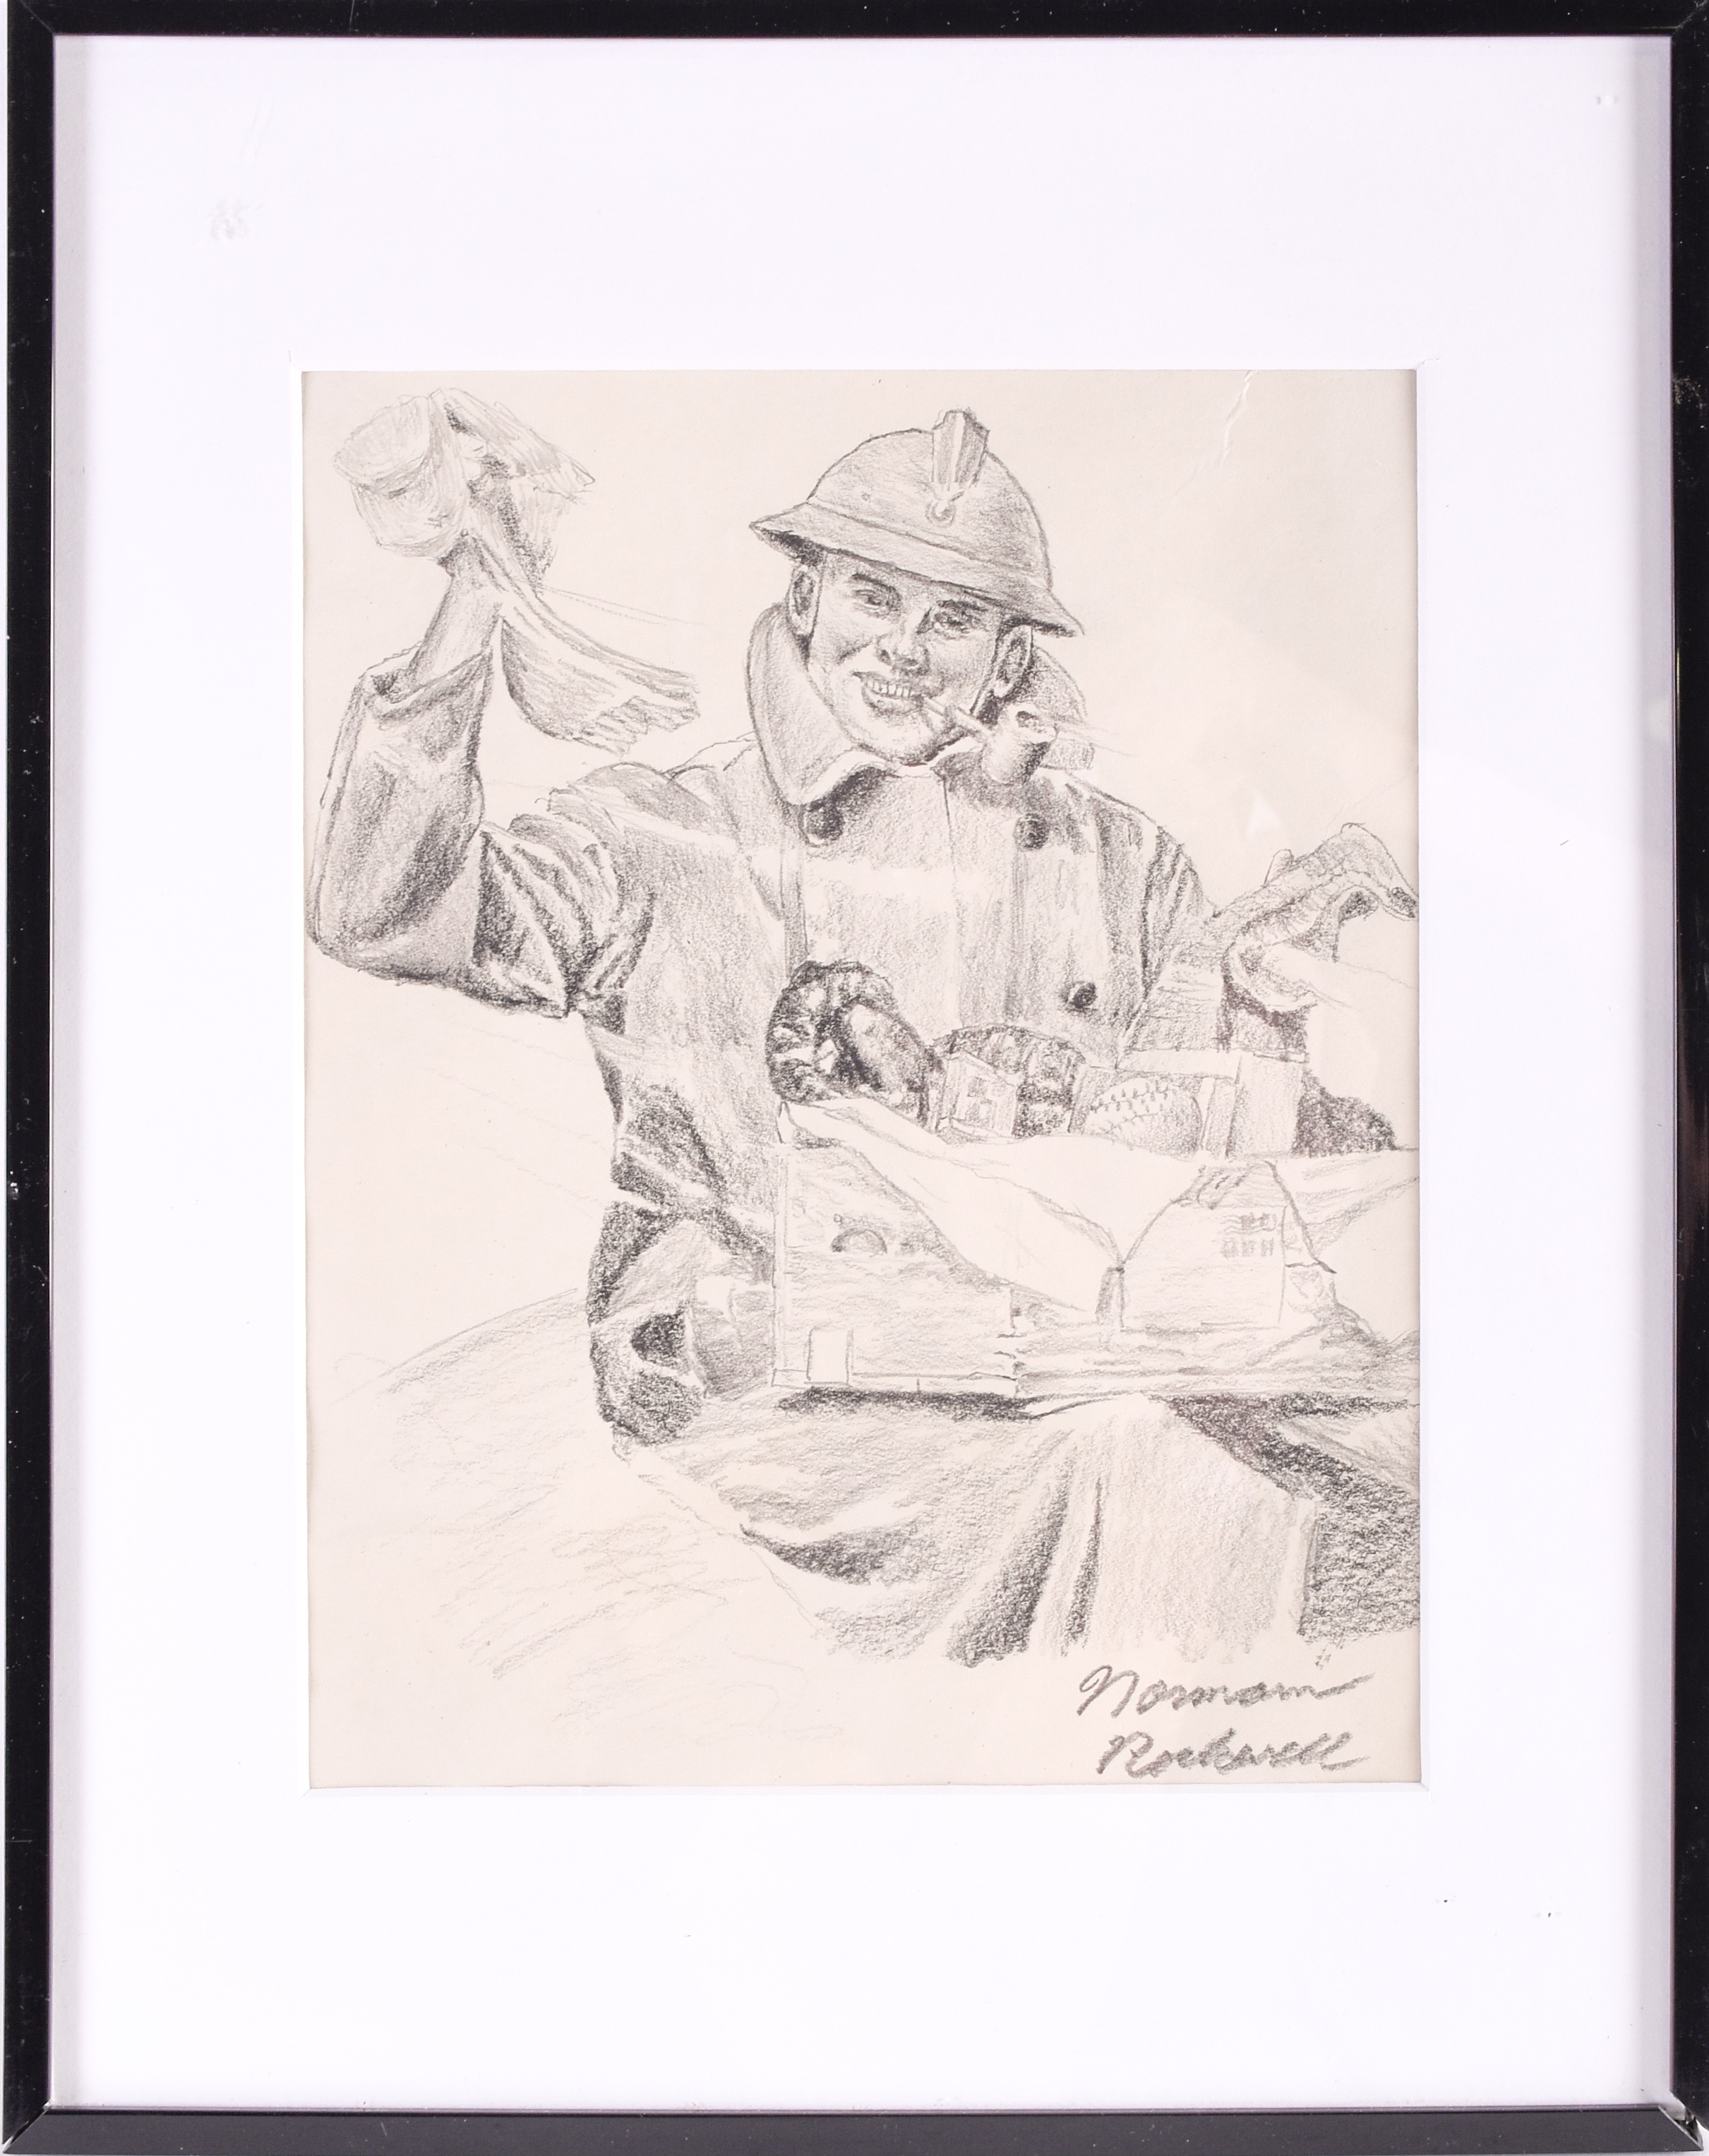 Norman Rockwell (1894-1978), a pencil drawing on paper. Sold for £5,200.